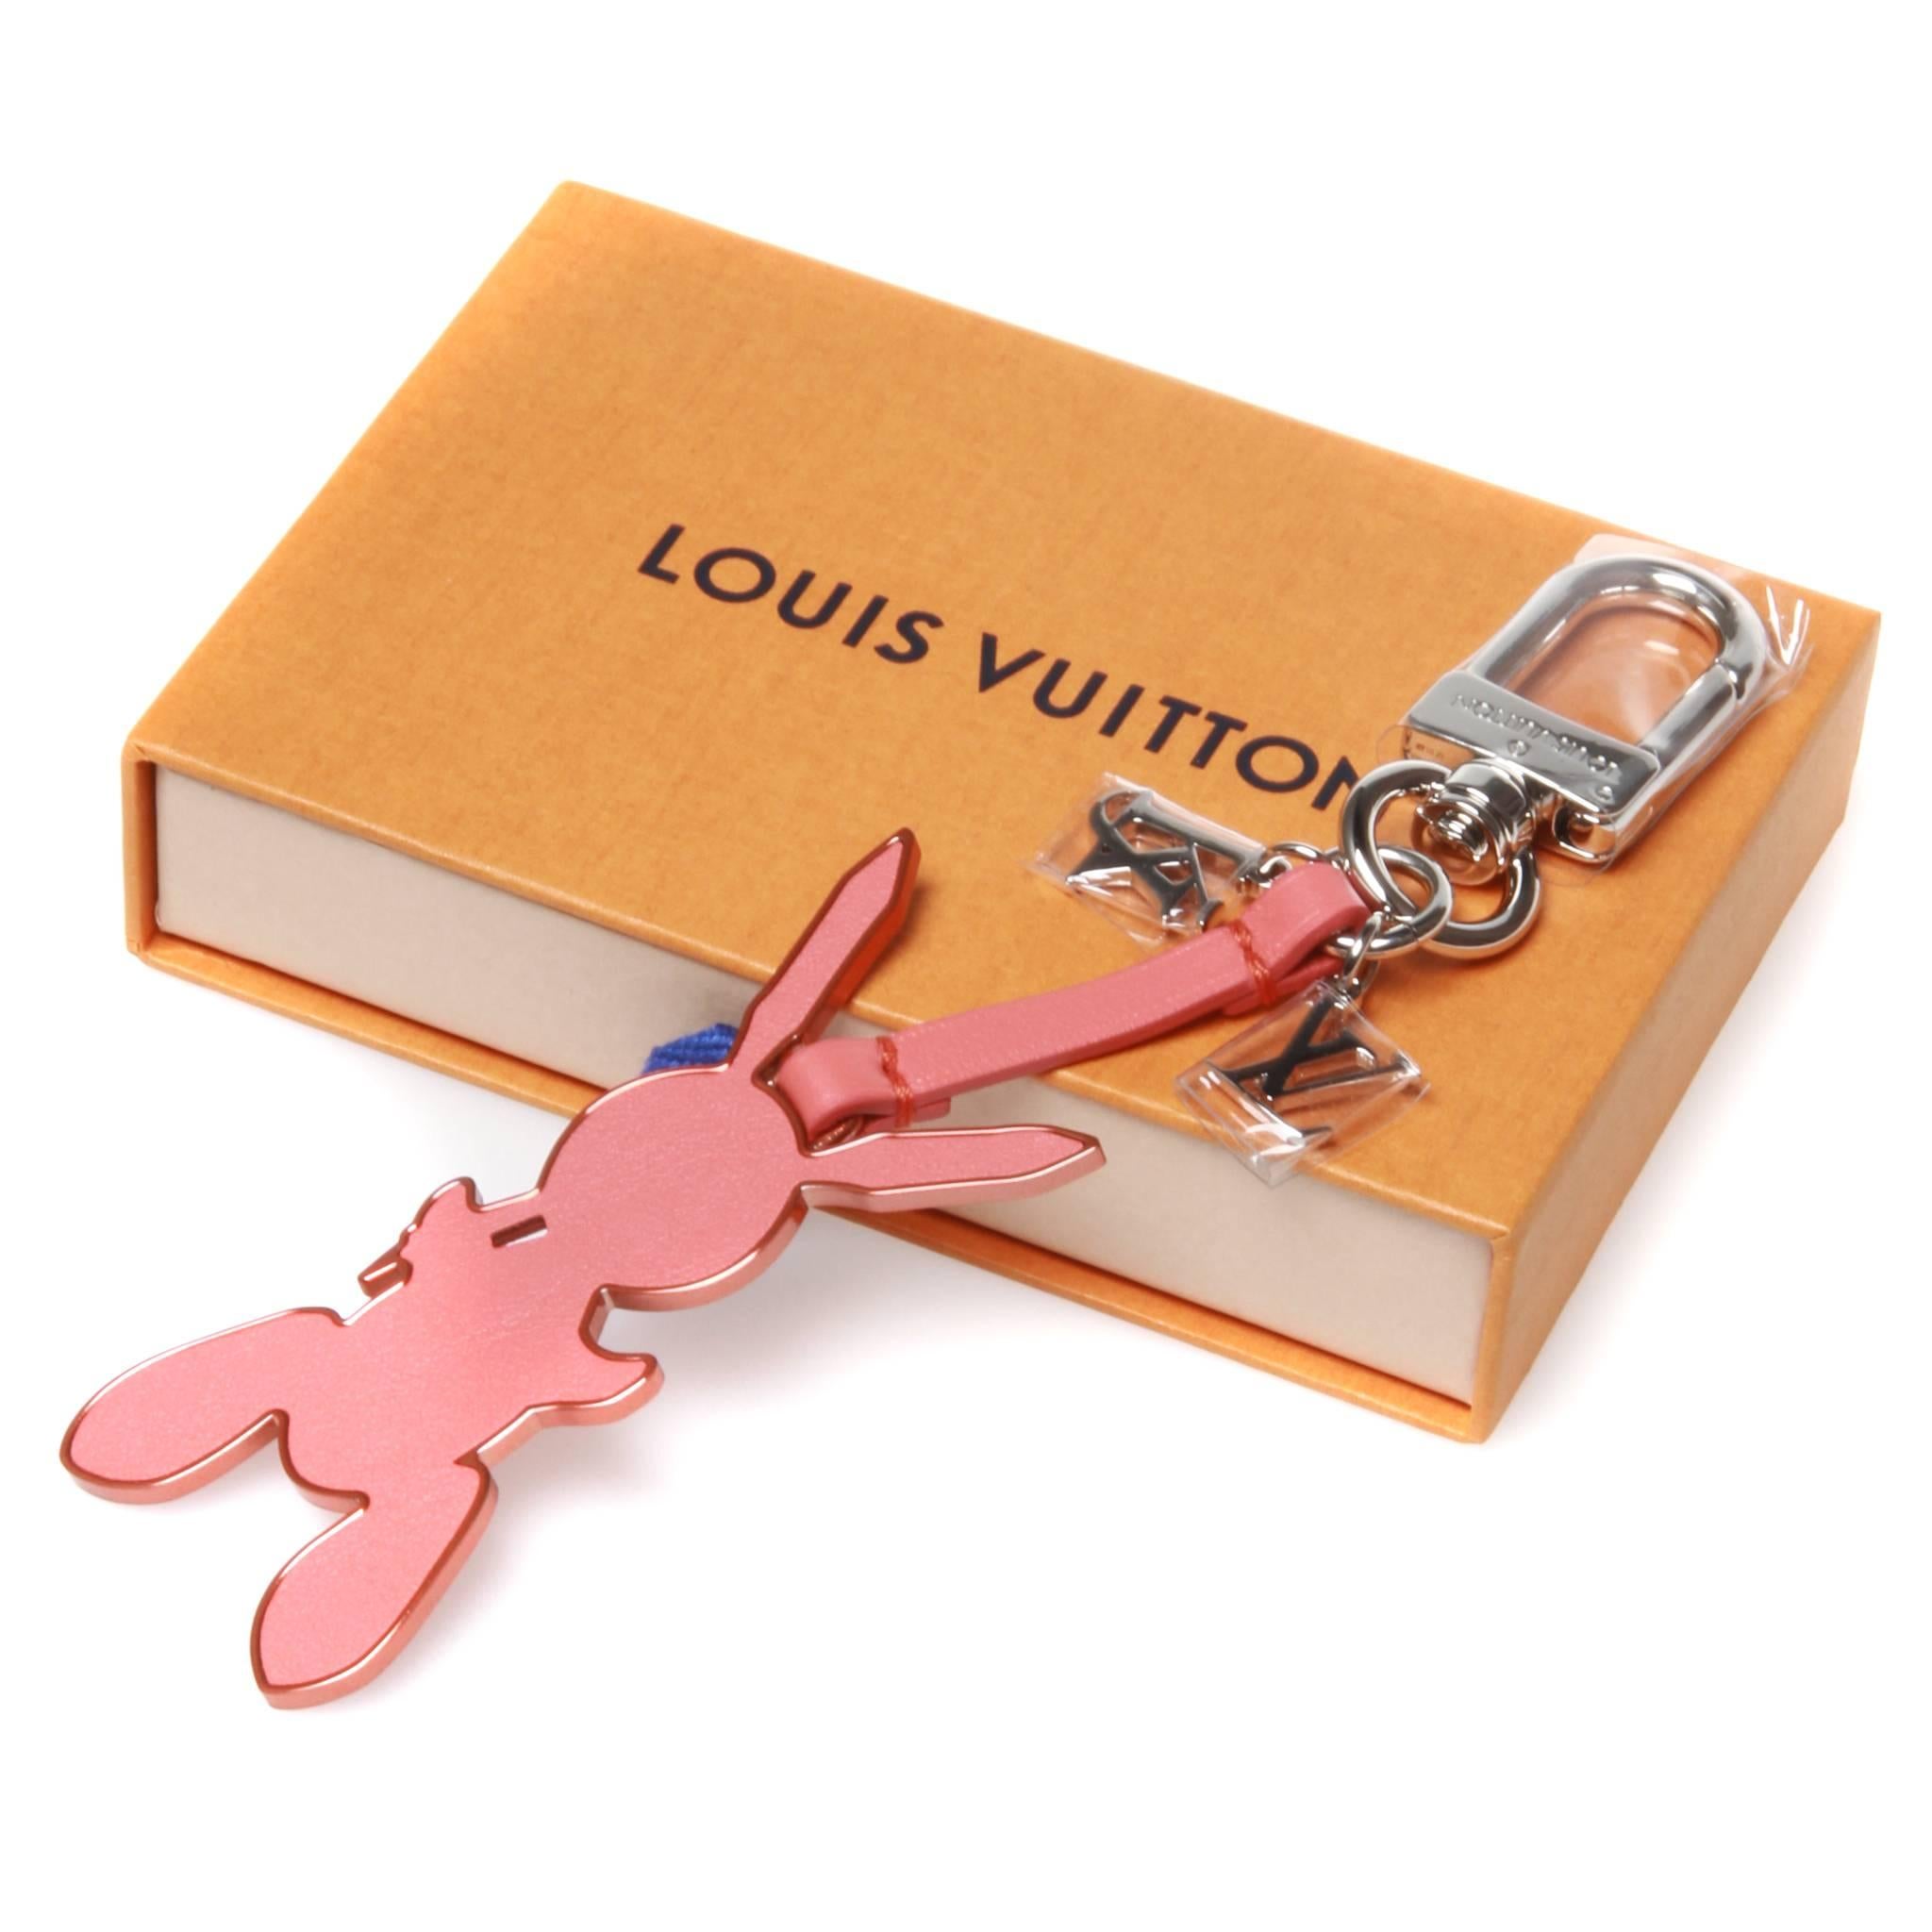 Inspired by the iconic rabbit, often played by Jeff Koons in his work, this bag charm will spice up any Louis Vuitton bag thanks to its original shape and bright colours. Louis Vuitton’s refinement is expressed through the work of the metallic